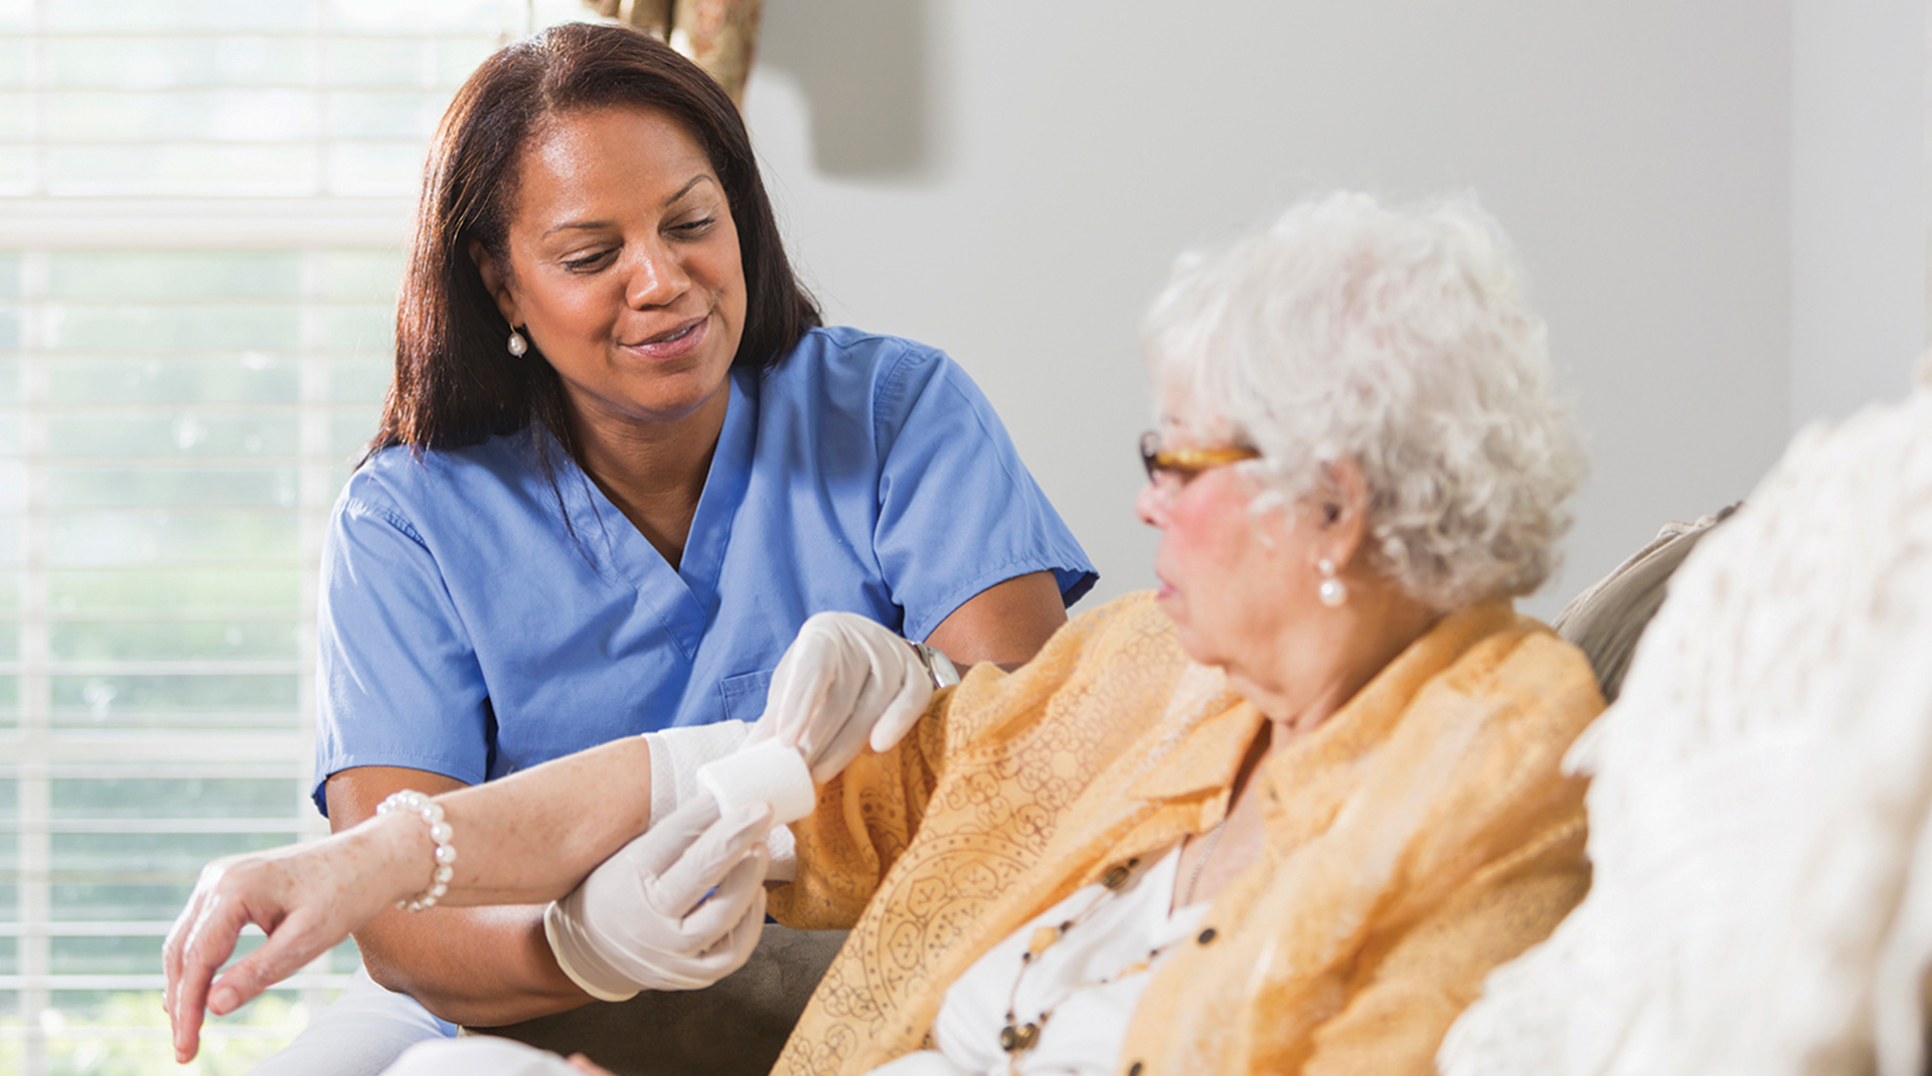 A caregiver gently applying a bandage to an elderly patient’s arm.